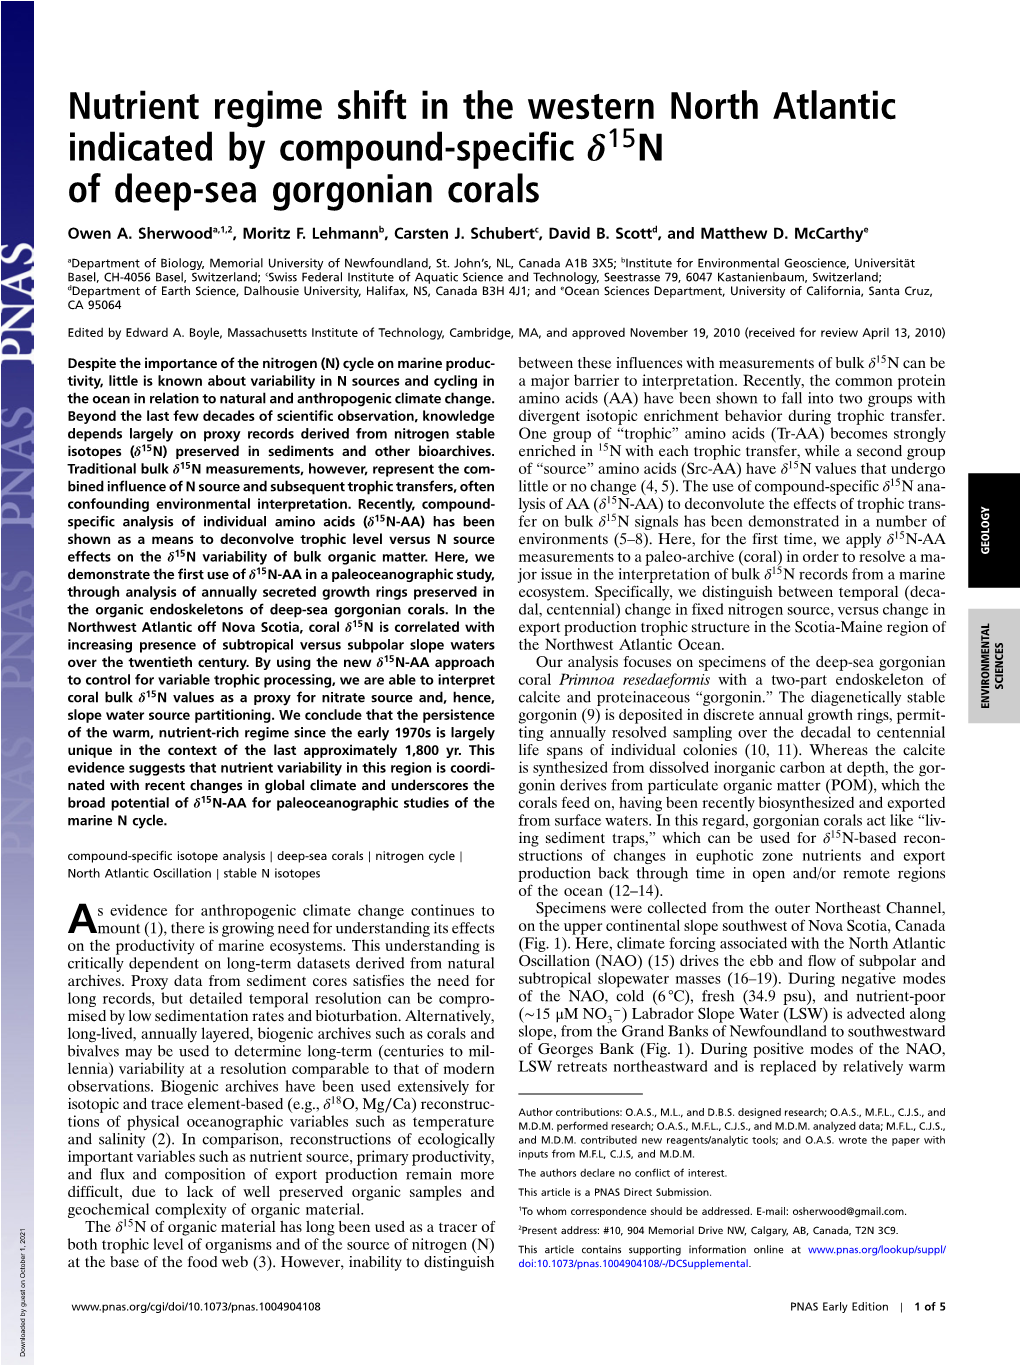 Nutrient Regime Shift in the Western North Atlantic Indicated by Compound-Specific Δ15 N of Deep-Sea Gorgonian Corals